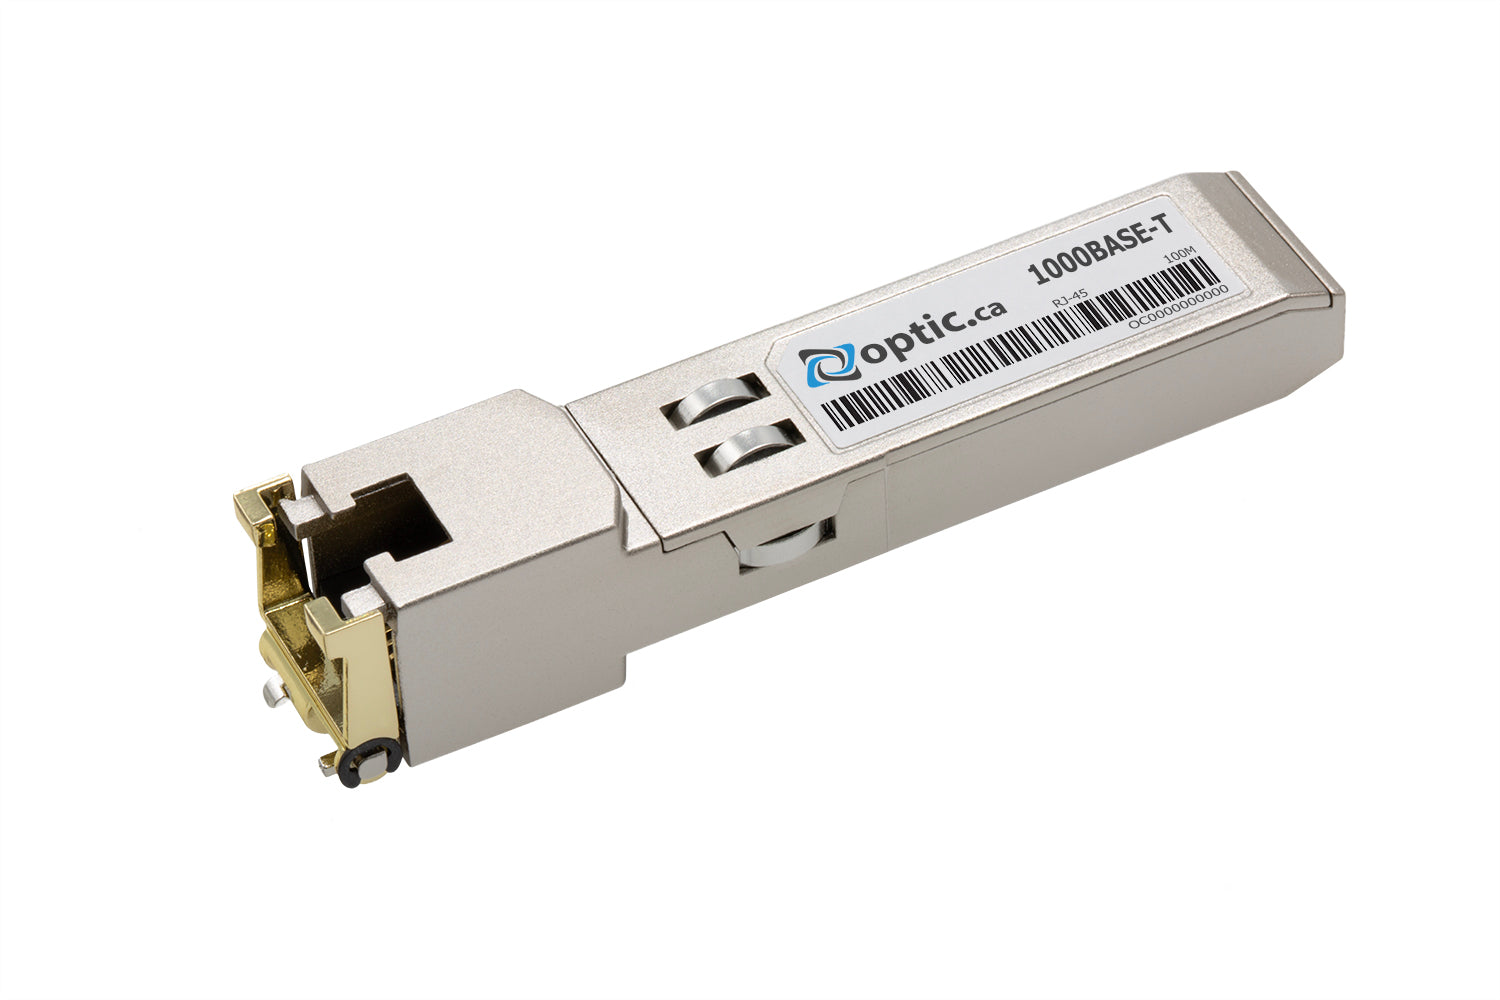 OPTIC.CA - 1000BASE-T SFP - 10054-OC - EXTREME NETWORKS COMPATIBLE